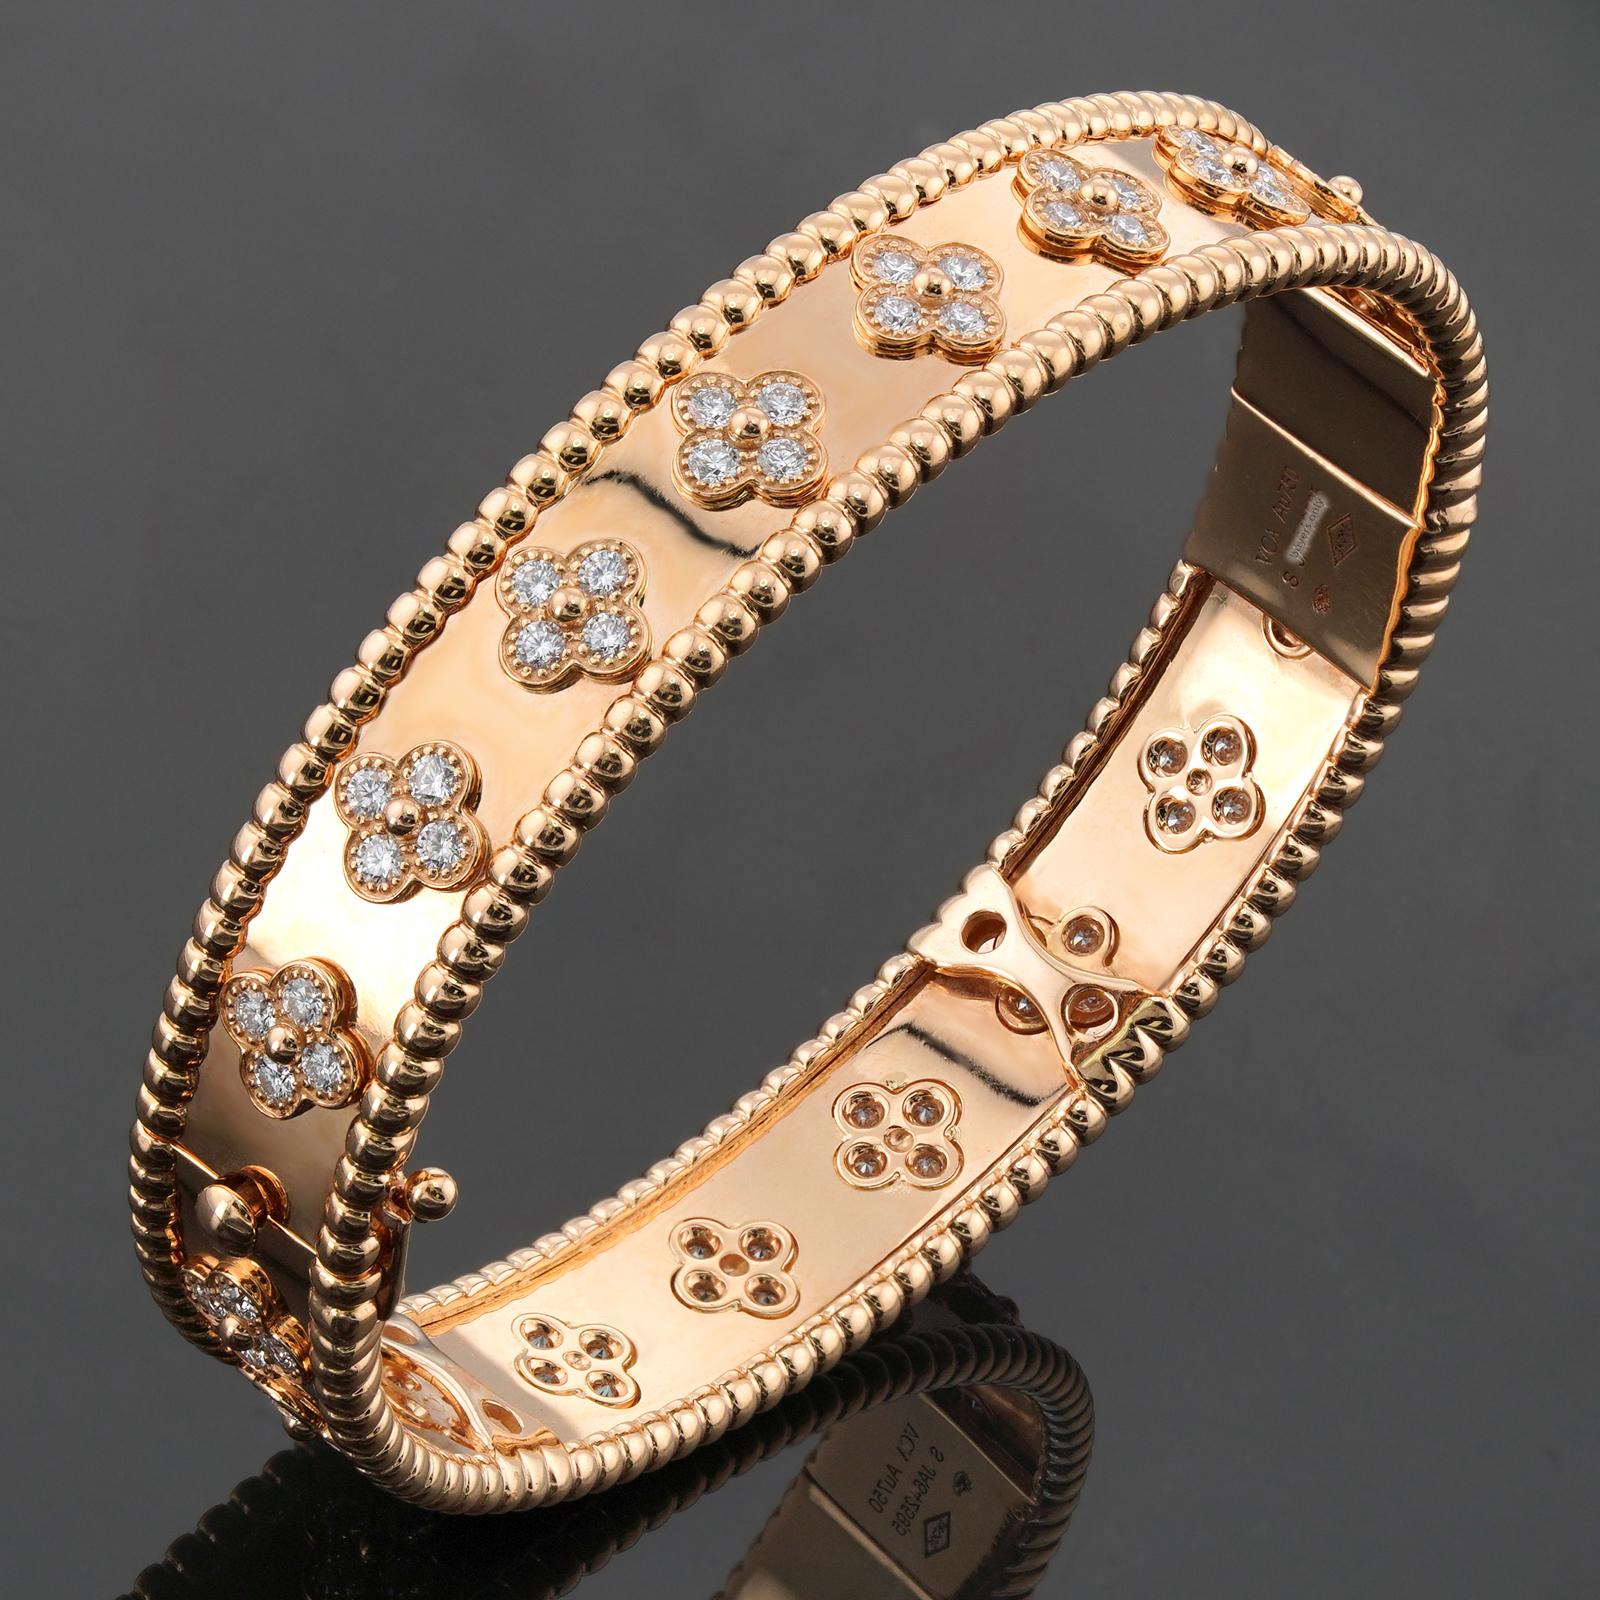 This gorgeous Van Cleef & Arpels bangle features a floral motif with a beaded border and is crafted in 18k yellow gold and accented with 80 round brilliant D-E-F diamonds weighing an estimated 1.78 carats. Made in France circa 2020s. Measurements: